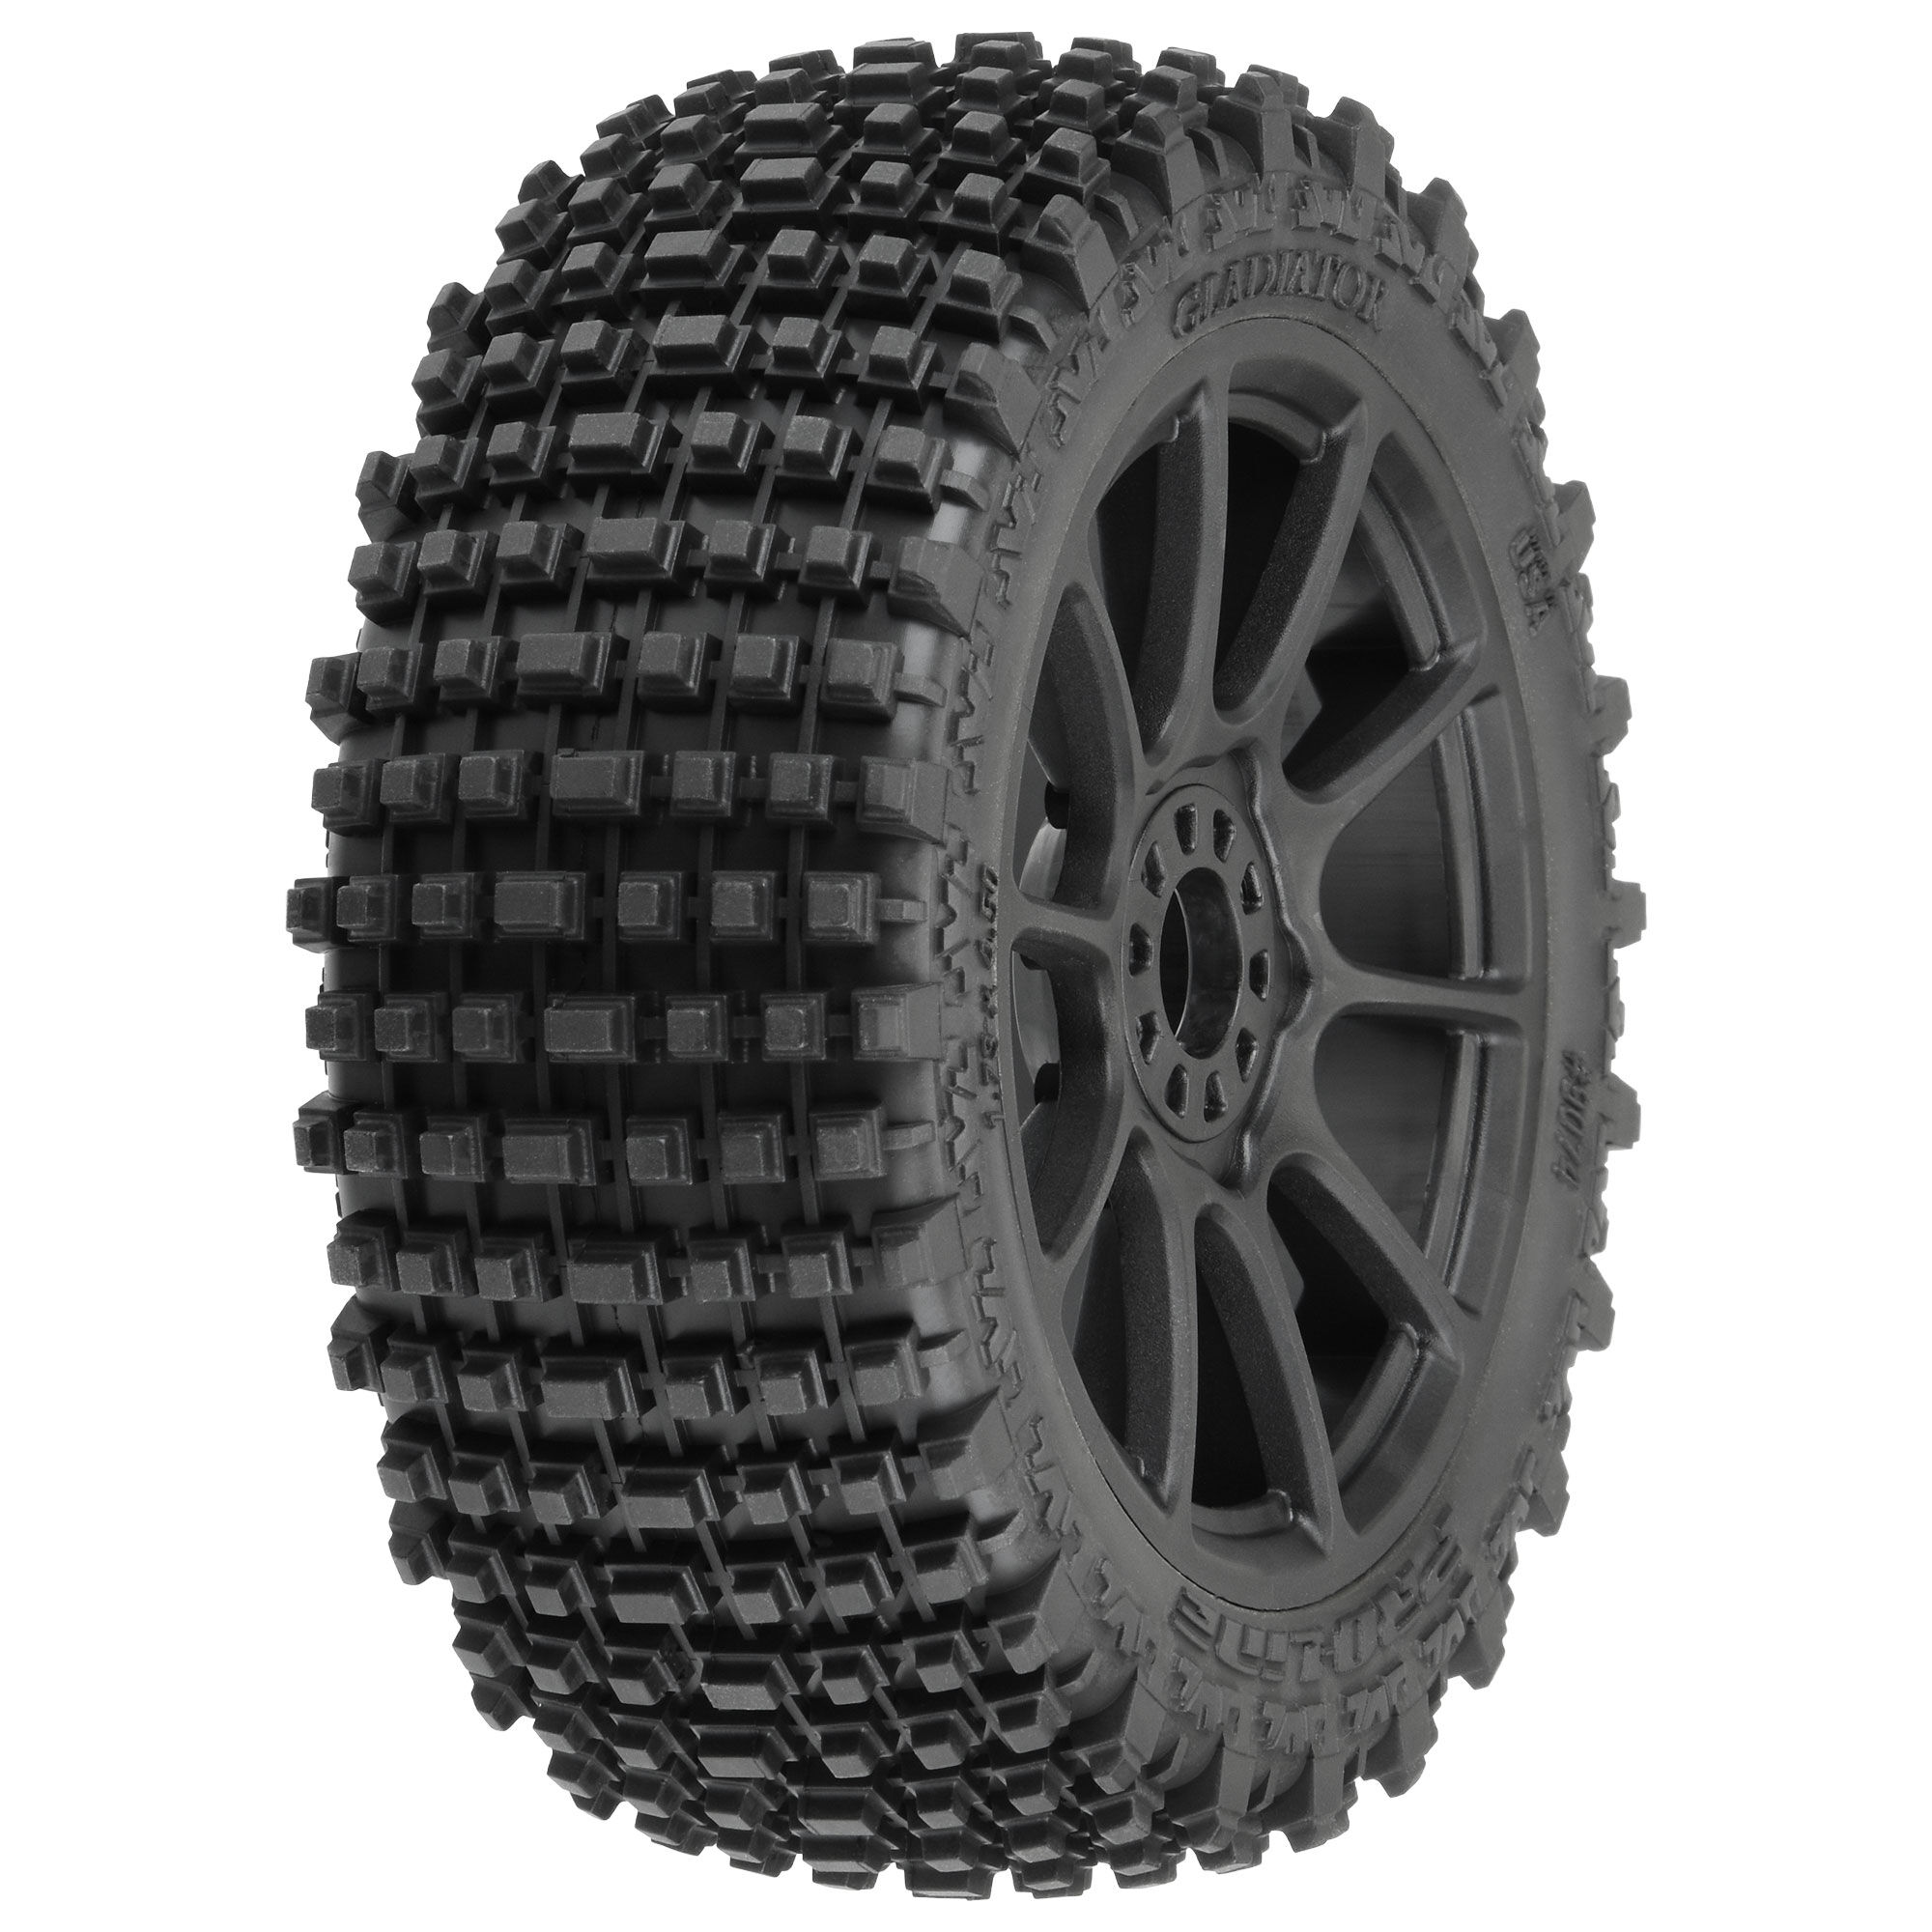 1/8 Gladiator M2 Buggy Tires Mounted 17mm Black Mach 10